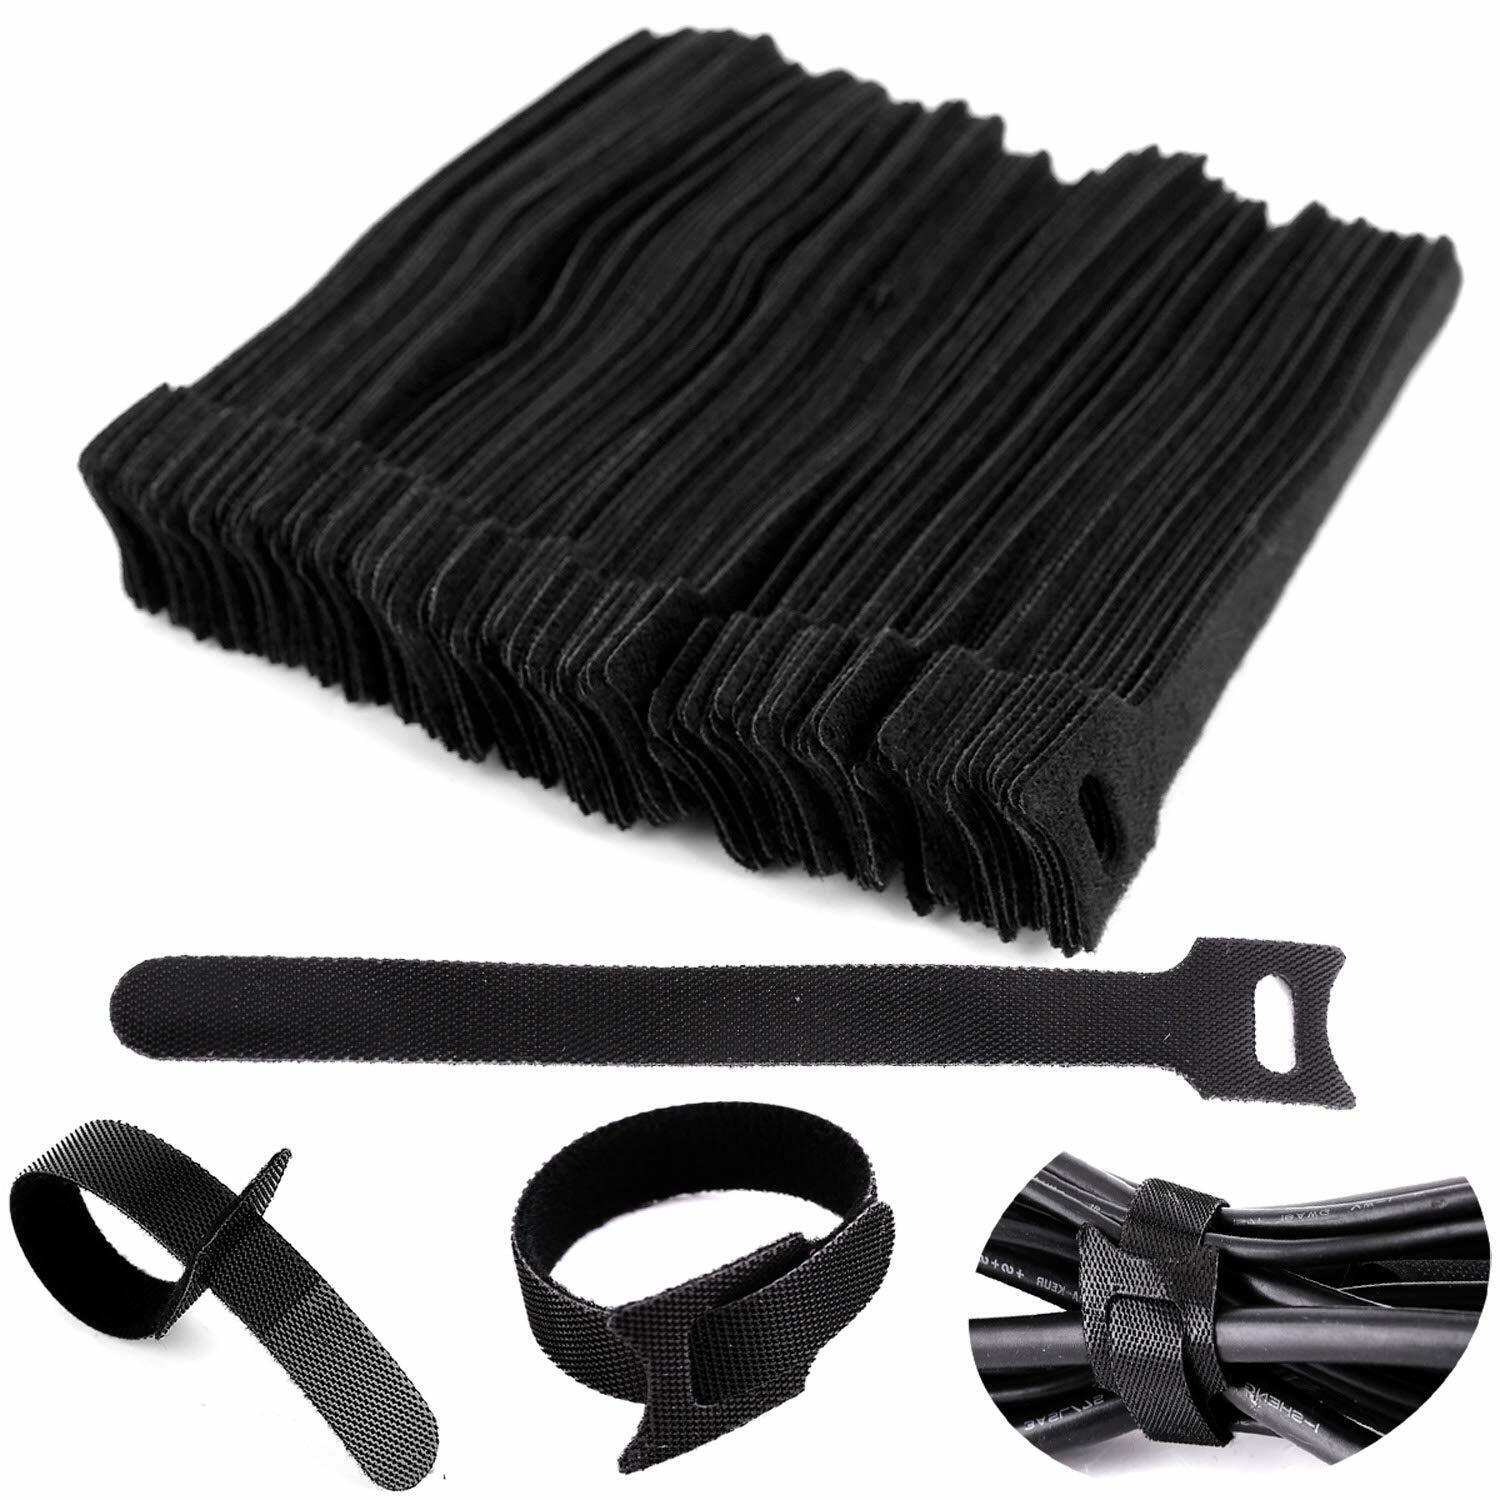 VELCRO Brand ONE-WRAP Thin Ties Cable Cord Organizer Reusable Straps  50 pcs NEW